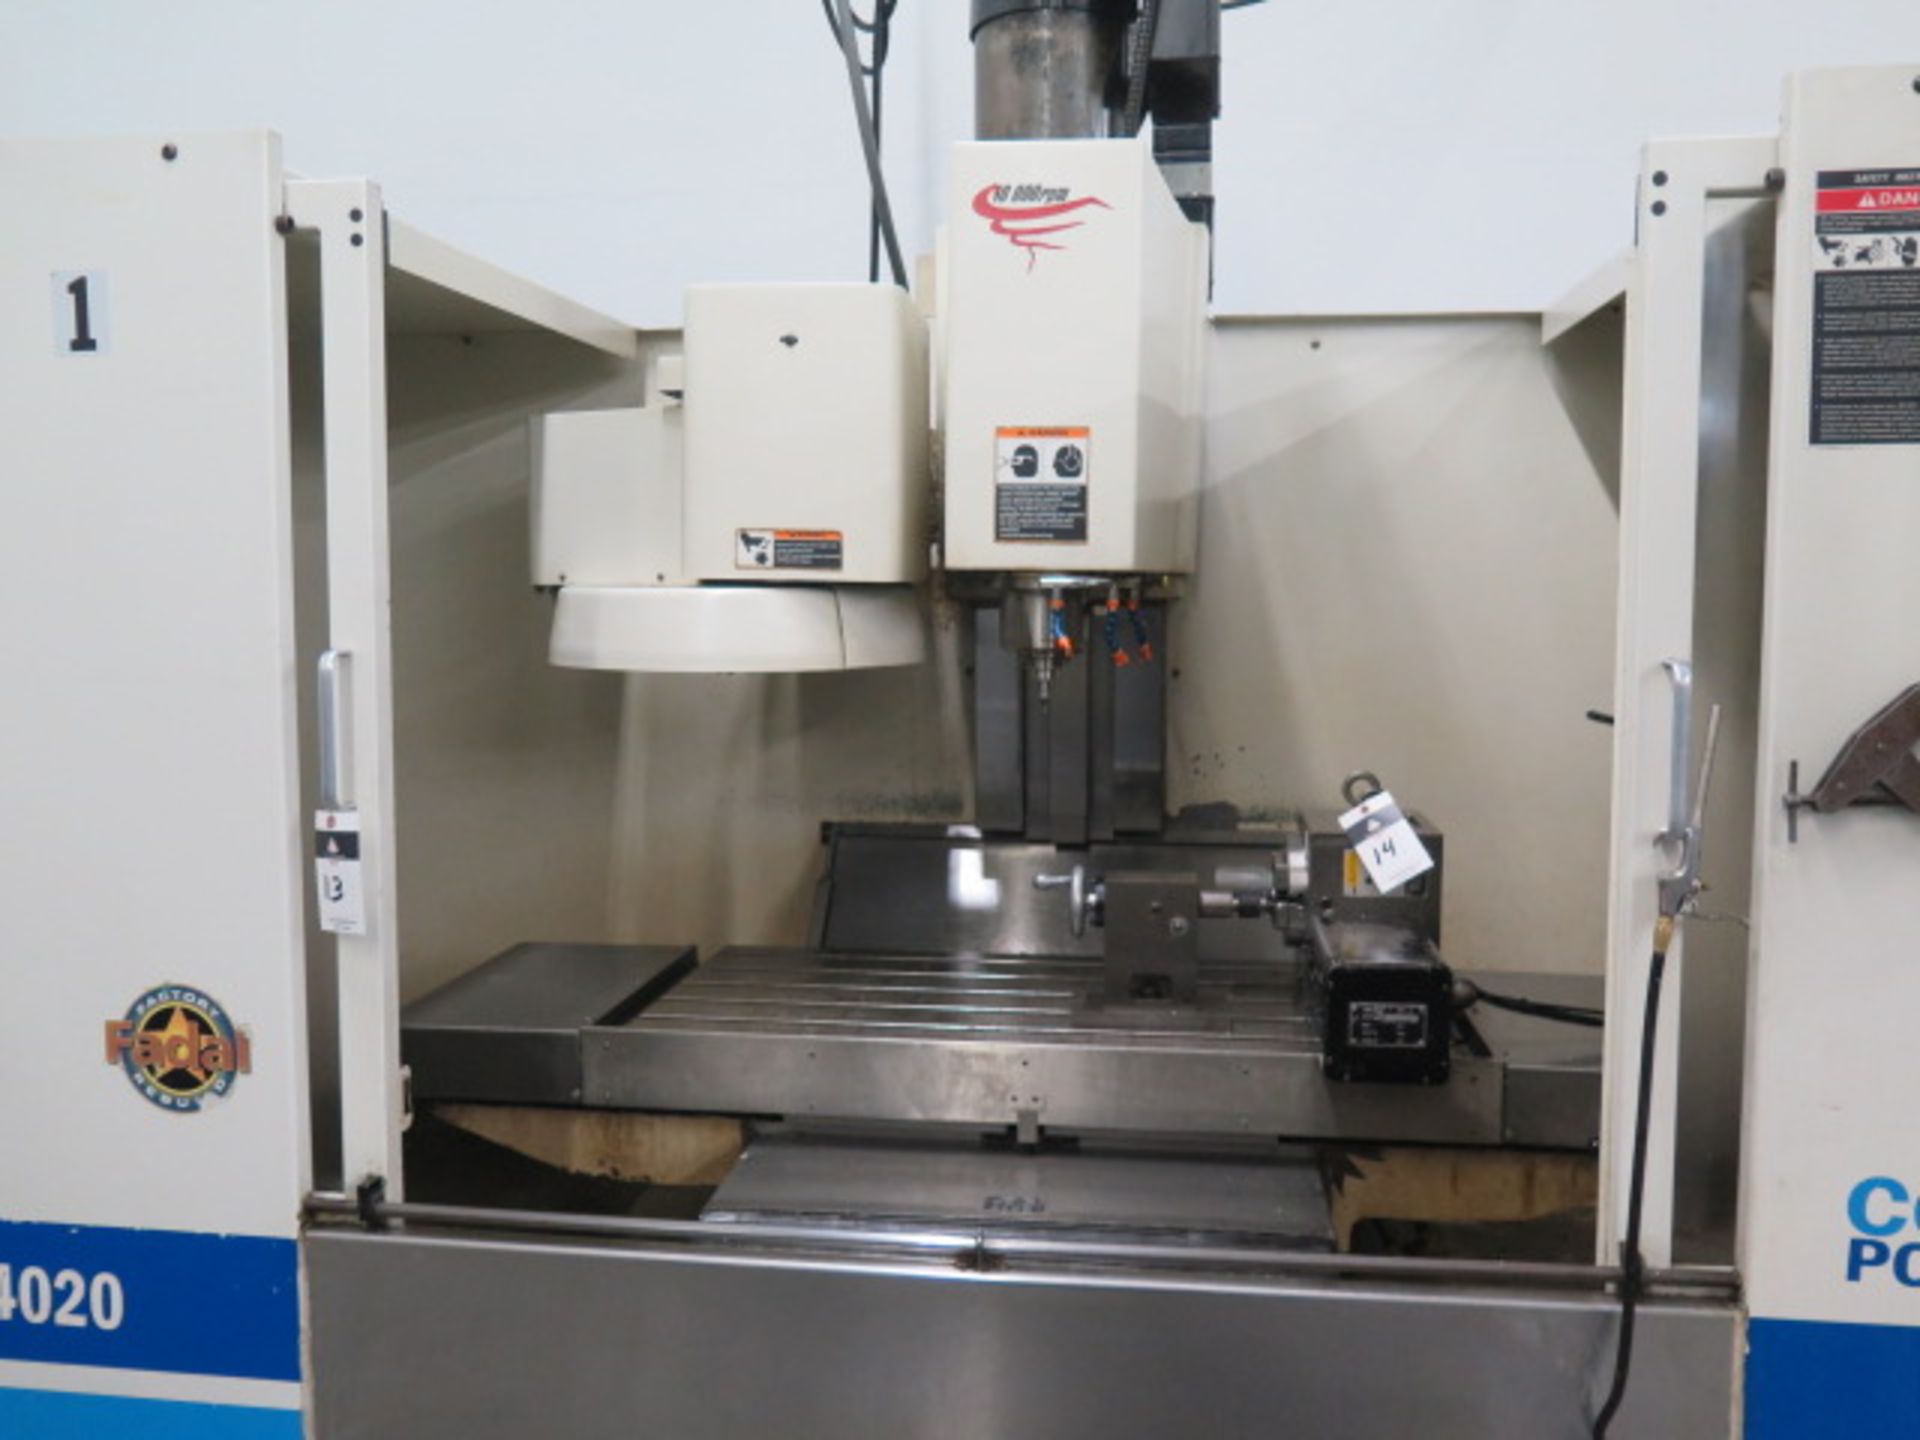 2004 Fadal VMC4020HT 4-Axis CNC Vertical Machining Center s/n 032004056312 w/ Fadal Multiprocessor - Image 6 of 13